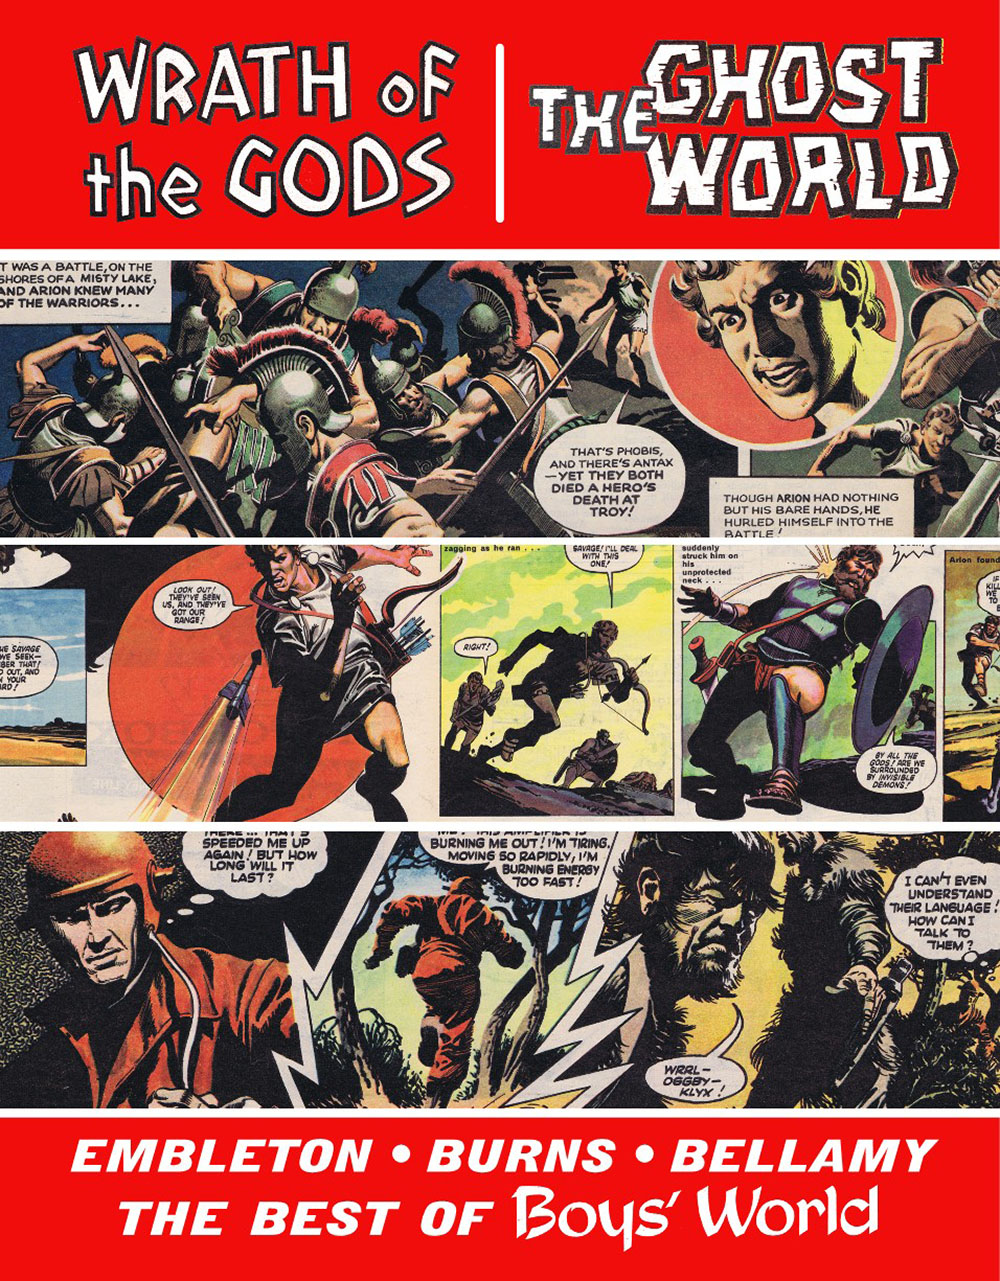 Complete Wrath of the Gods (Embleton) & Ghost World (Bellamy) art by Upcoming Books at The Illustration Art Gallery